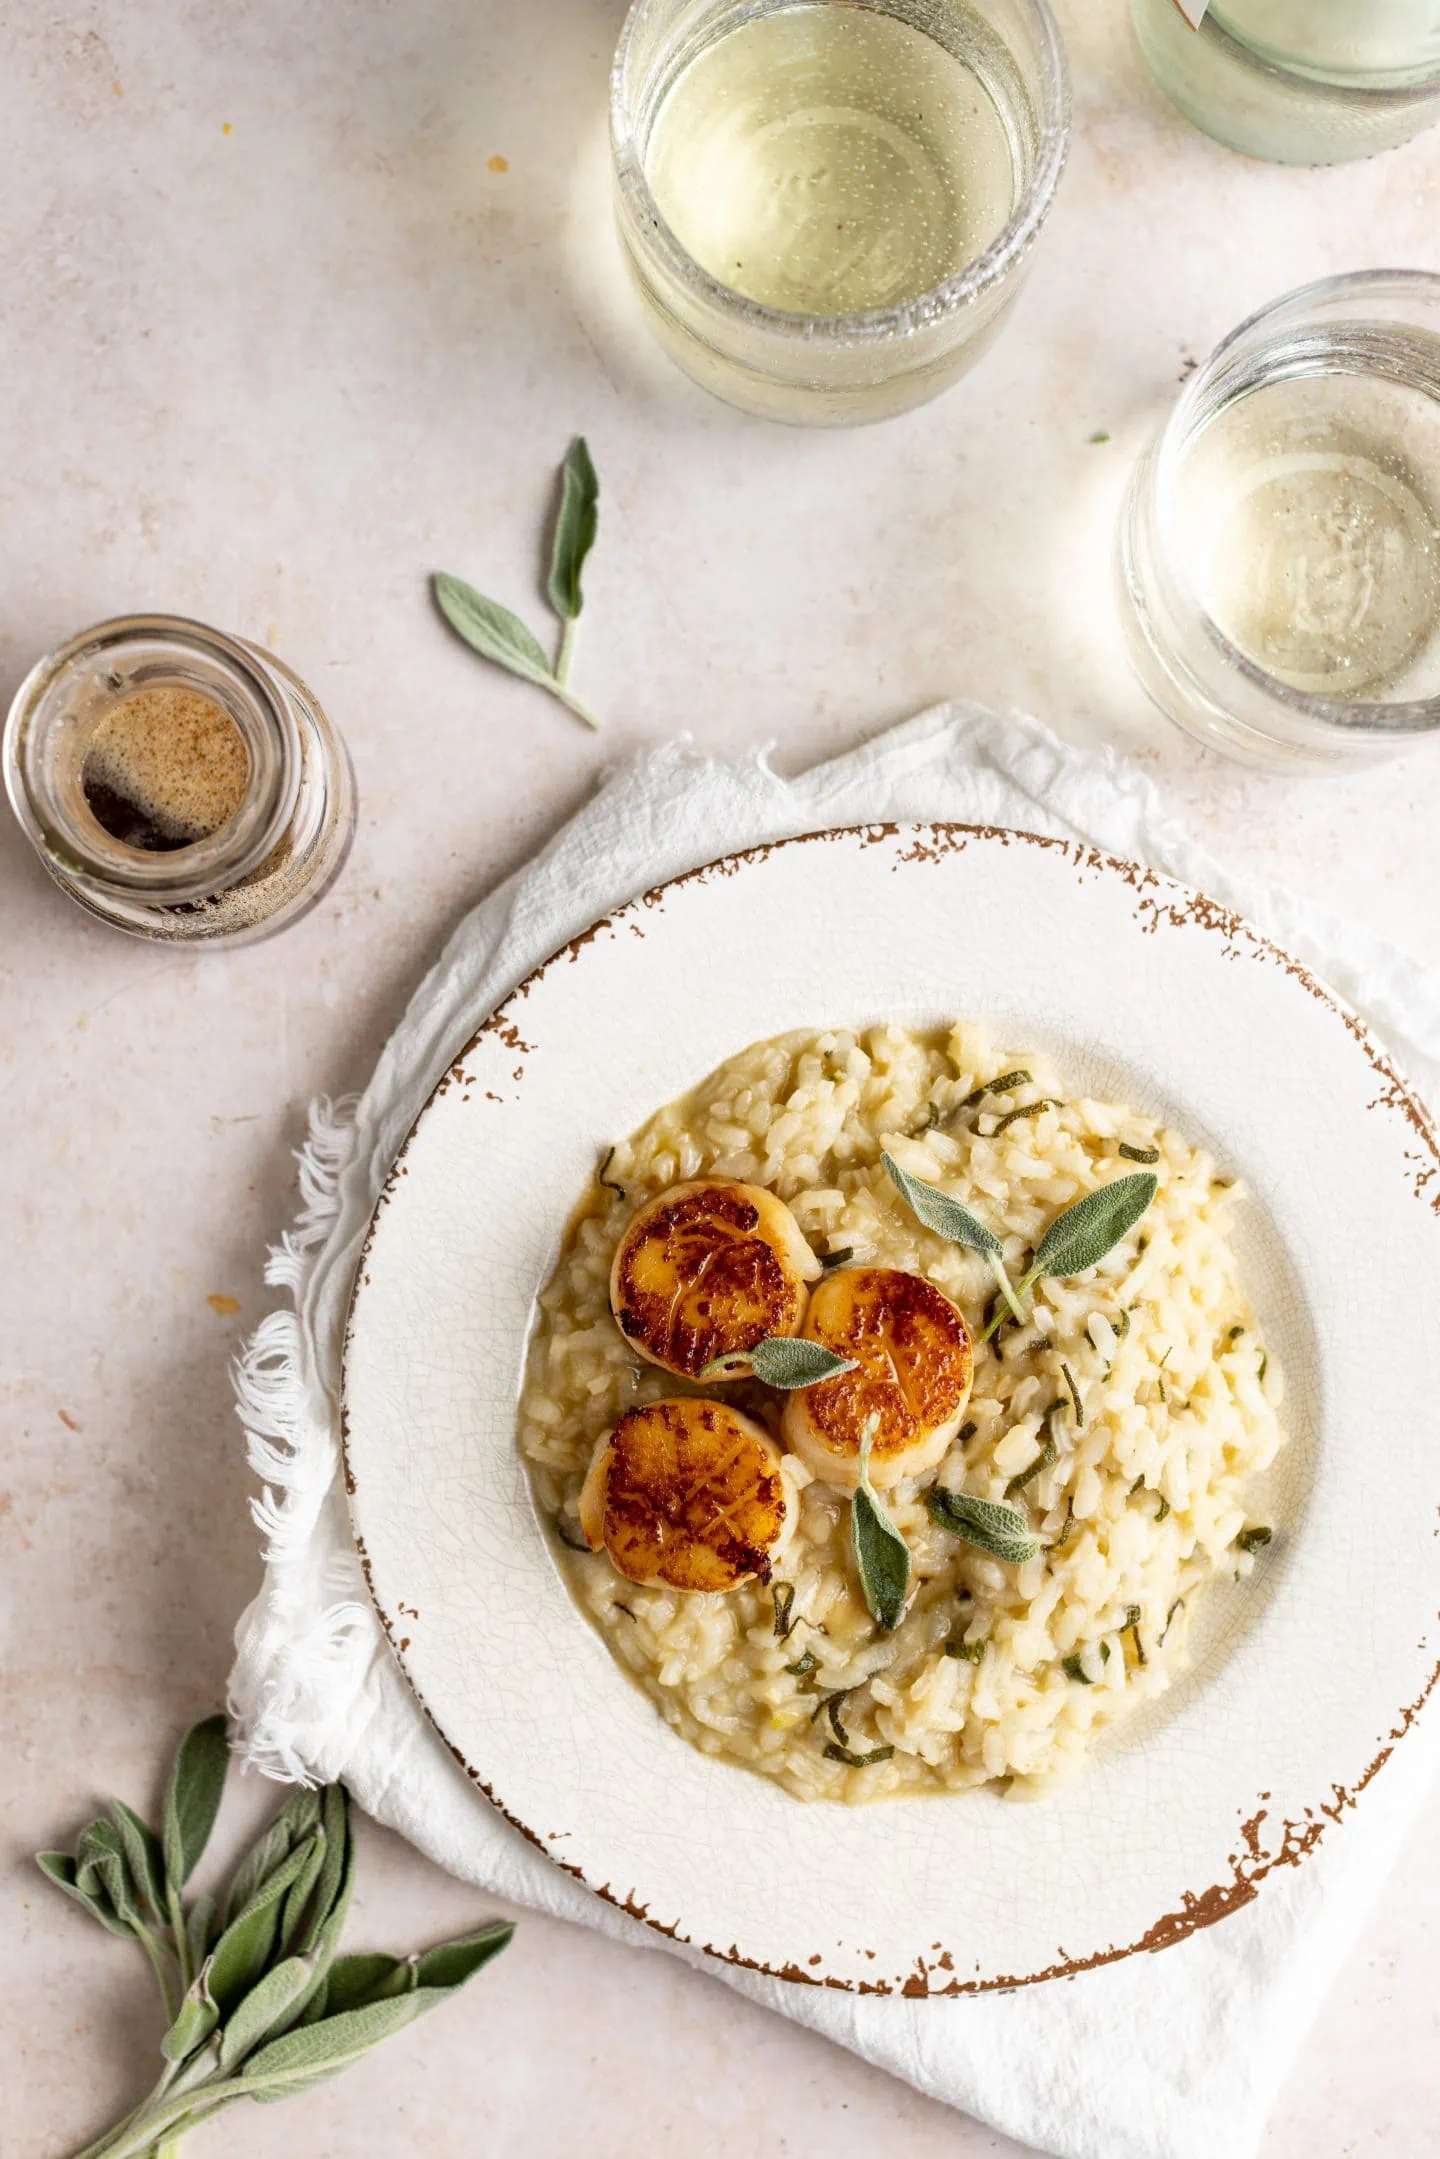 brown butter and sage risotto topped with seared scallops, brown butter and sage.